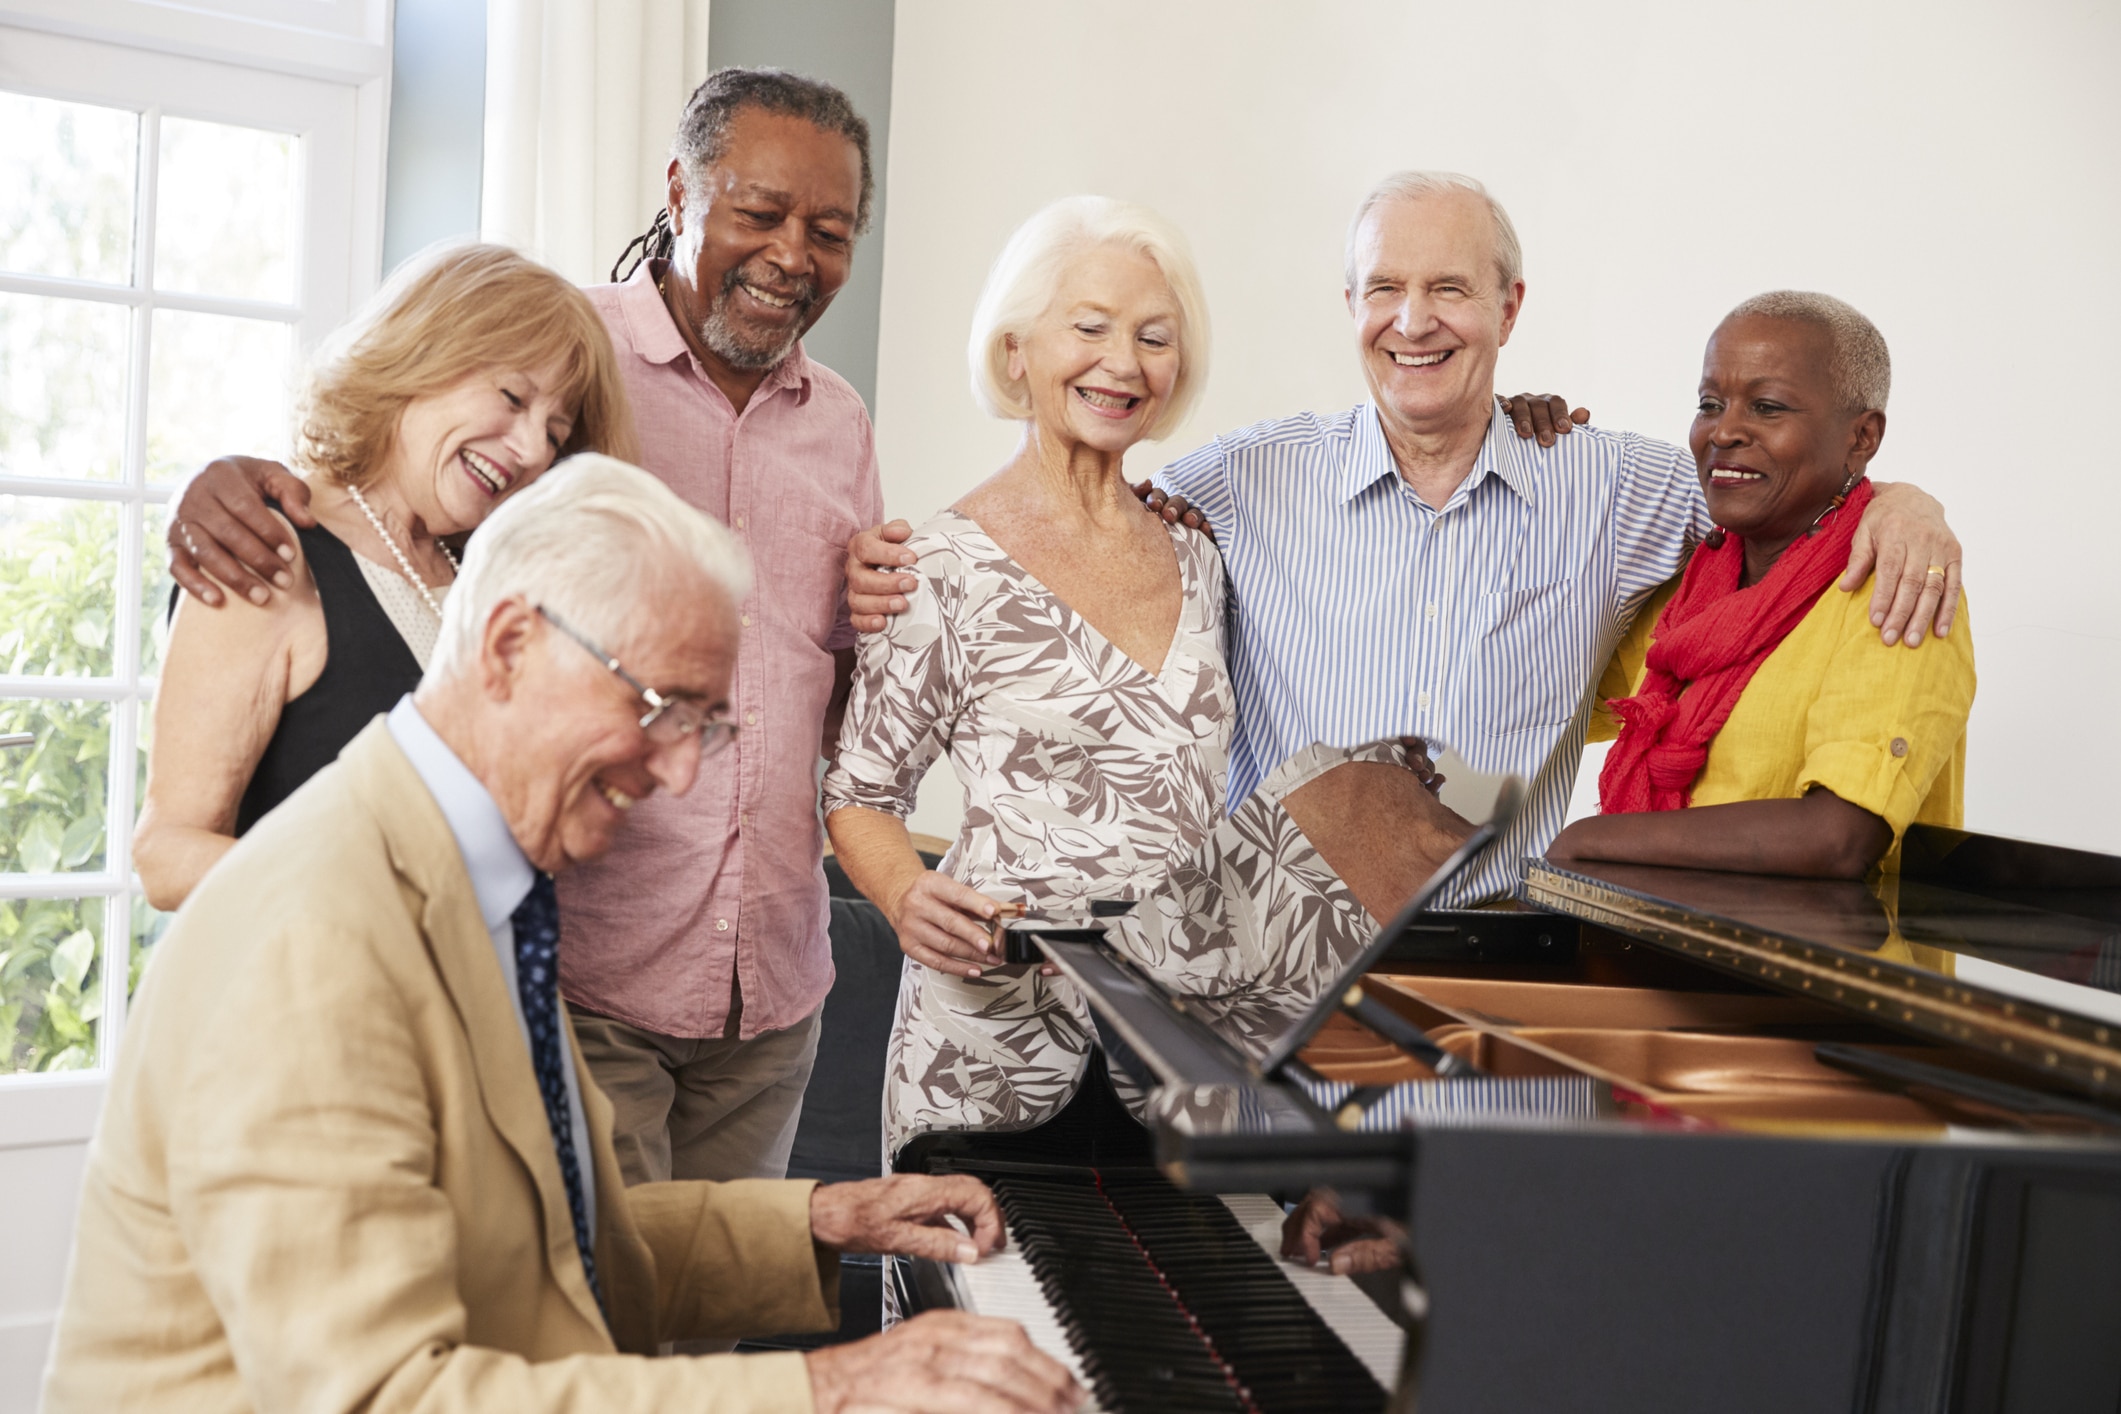 Residents listening to a piano